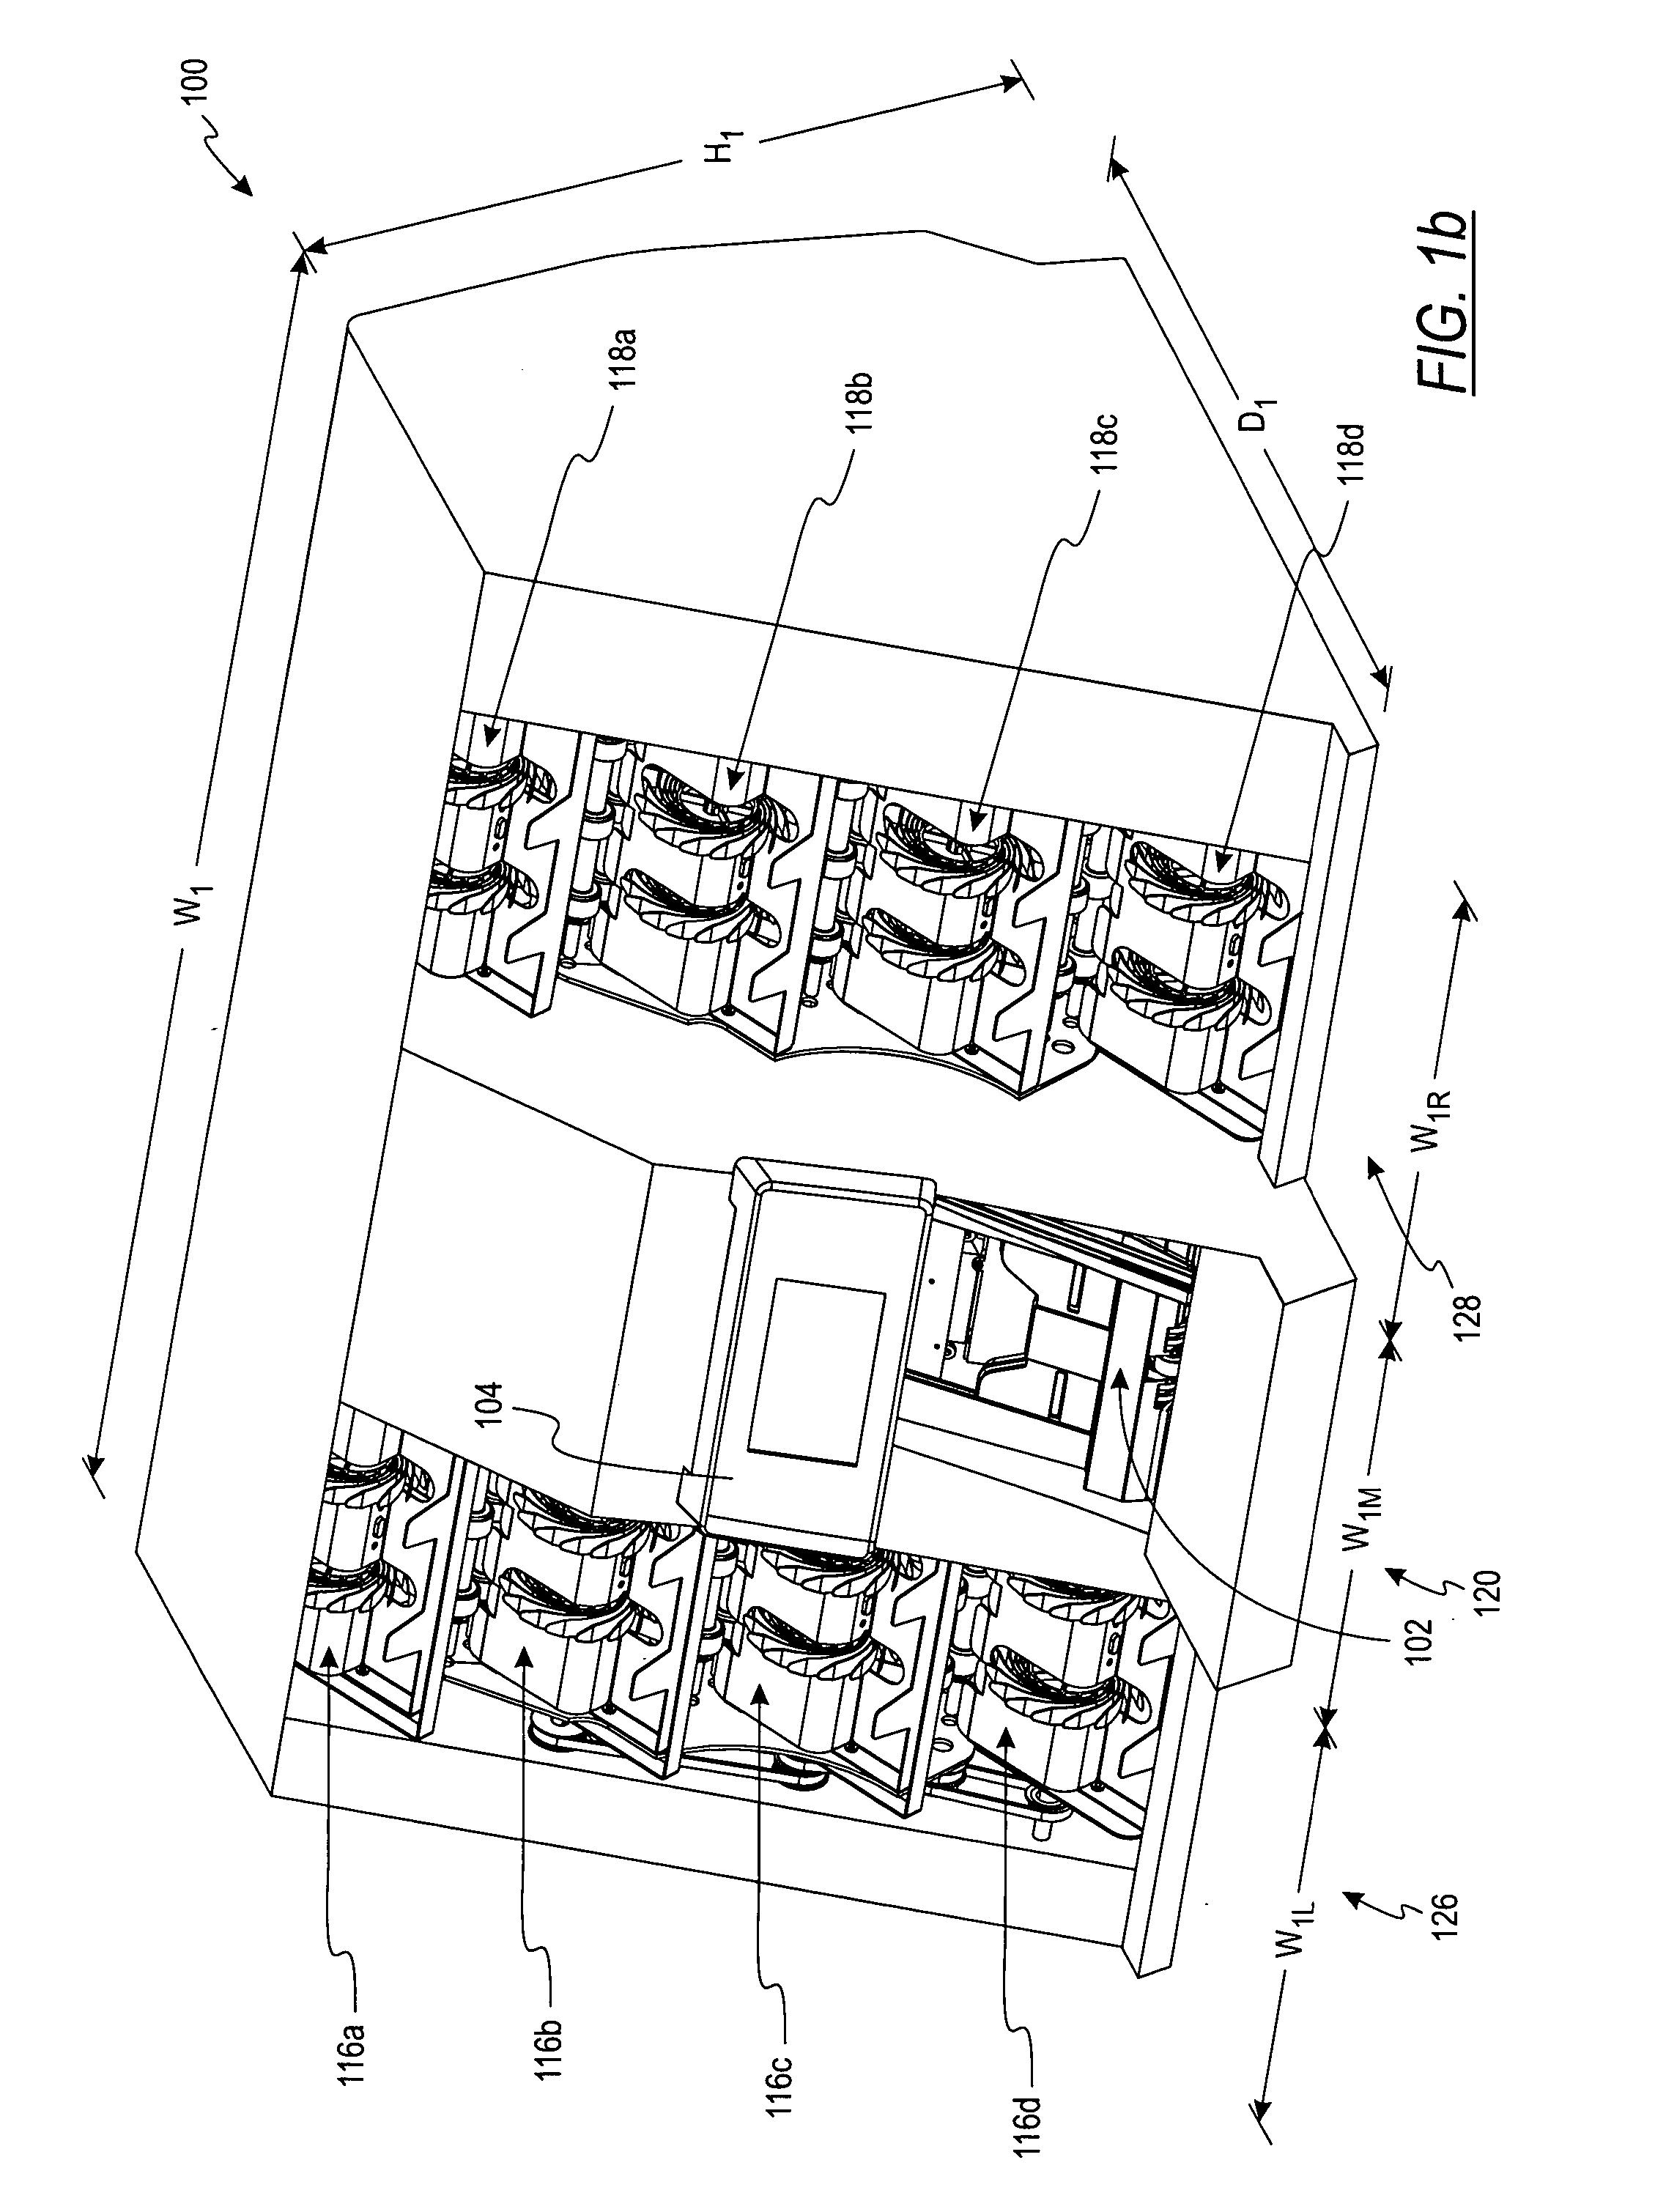 Currency processing device, method and system